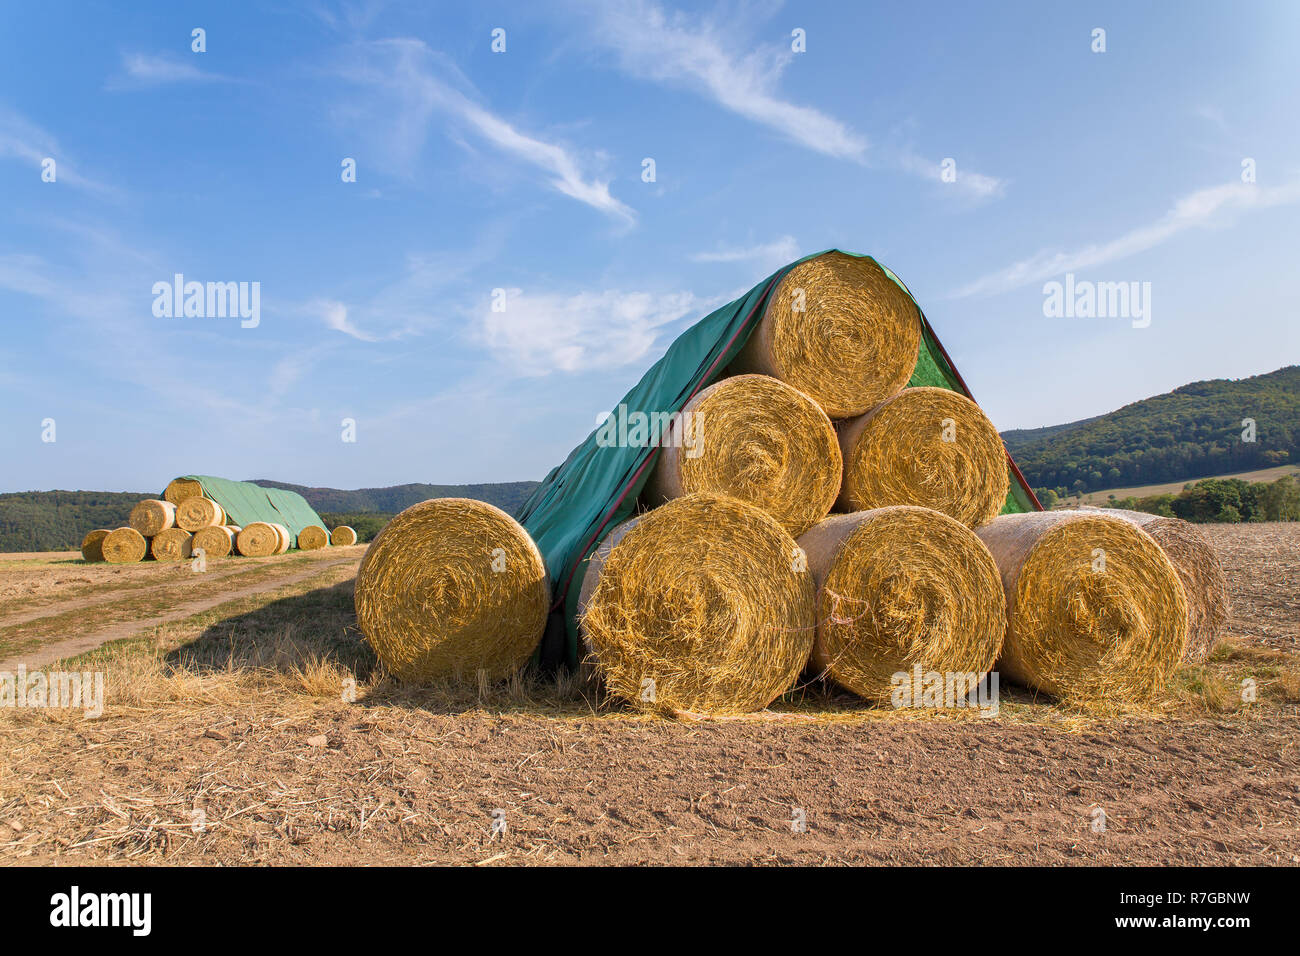 Landscape in Germany with pile of straw rolls in grain field Stock Photo